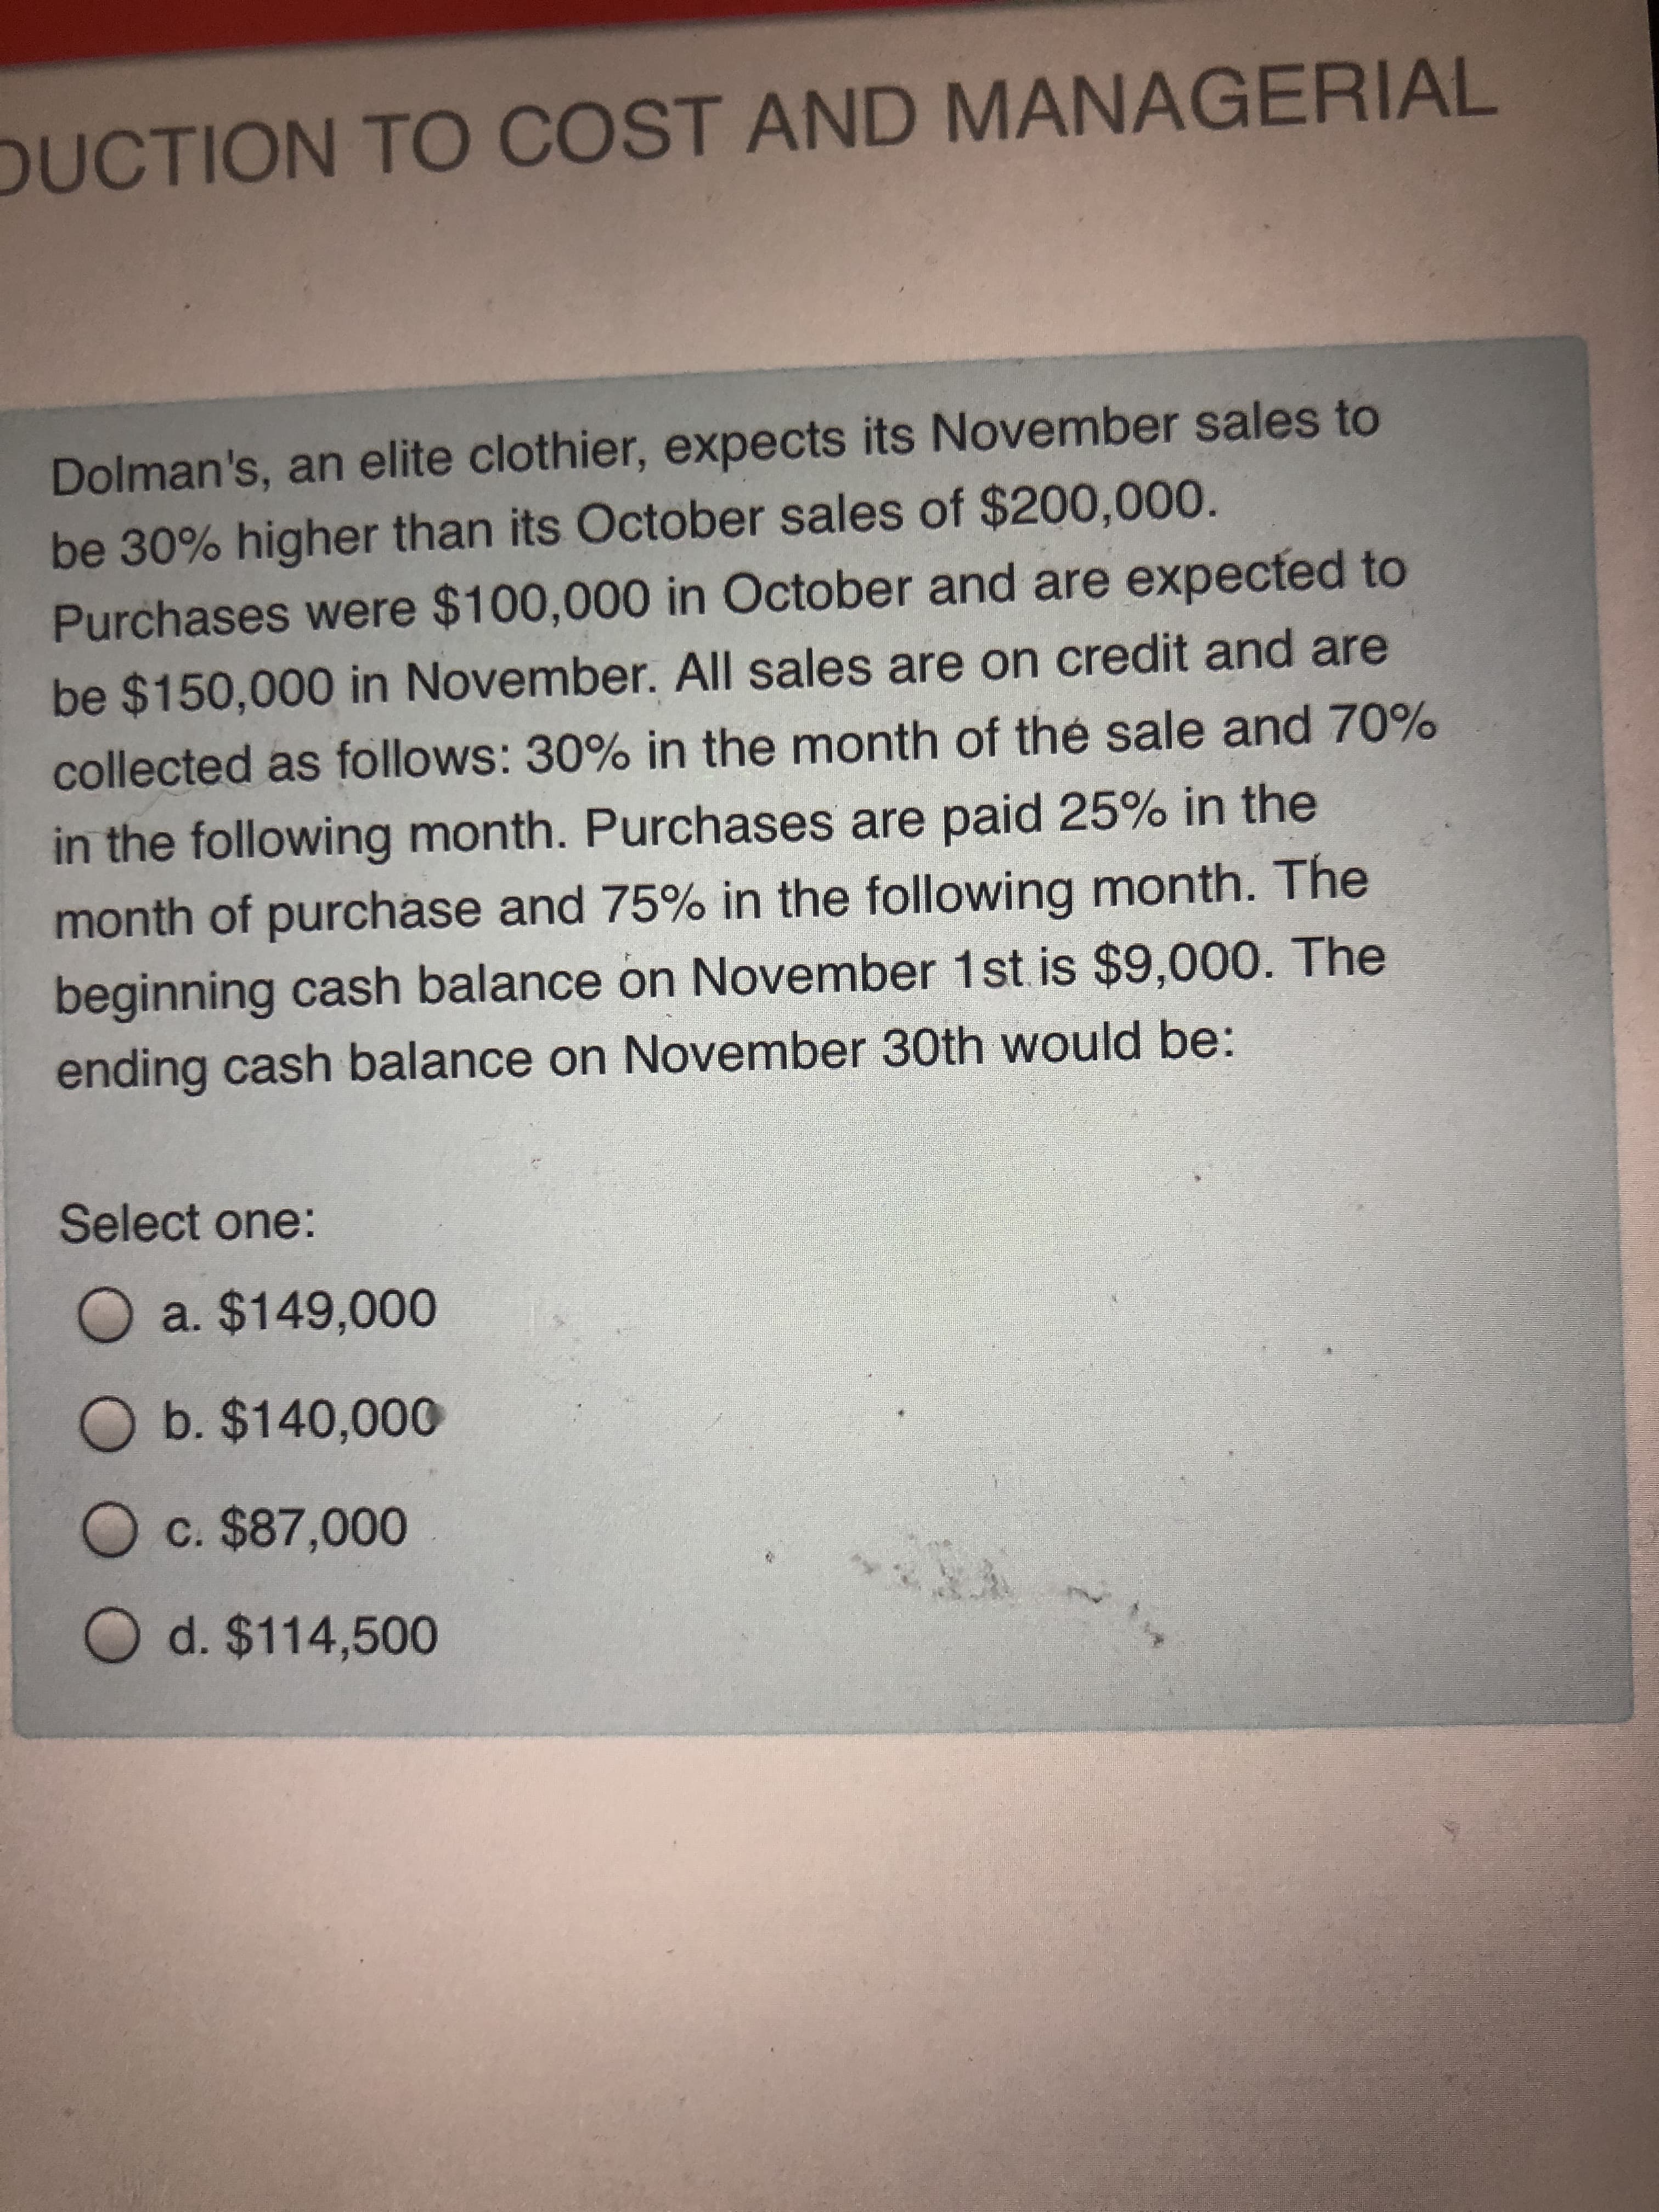 Dolman's, an elite clothier, expects its November sales to
be 30% higher than its October sales of $200,000.
Purchases were $100,000 in October and are expected to
be $150,000 in November. All sales are on credit and are
collected as follows: 30% in the month of thé sale and 70%
in the following month. Purchases are paid 25% in the
TL
